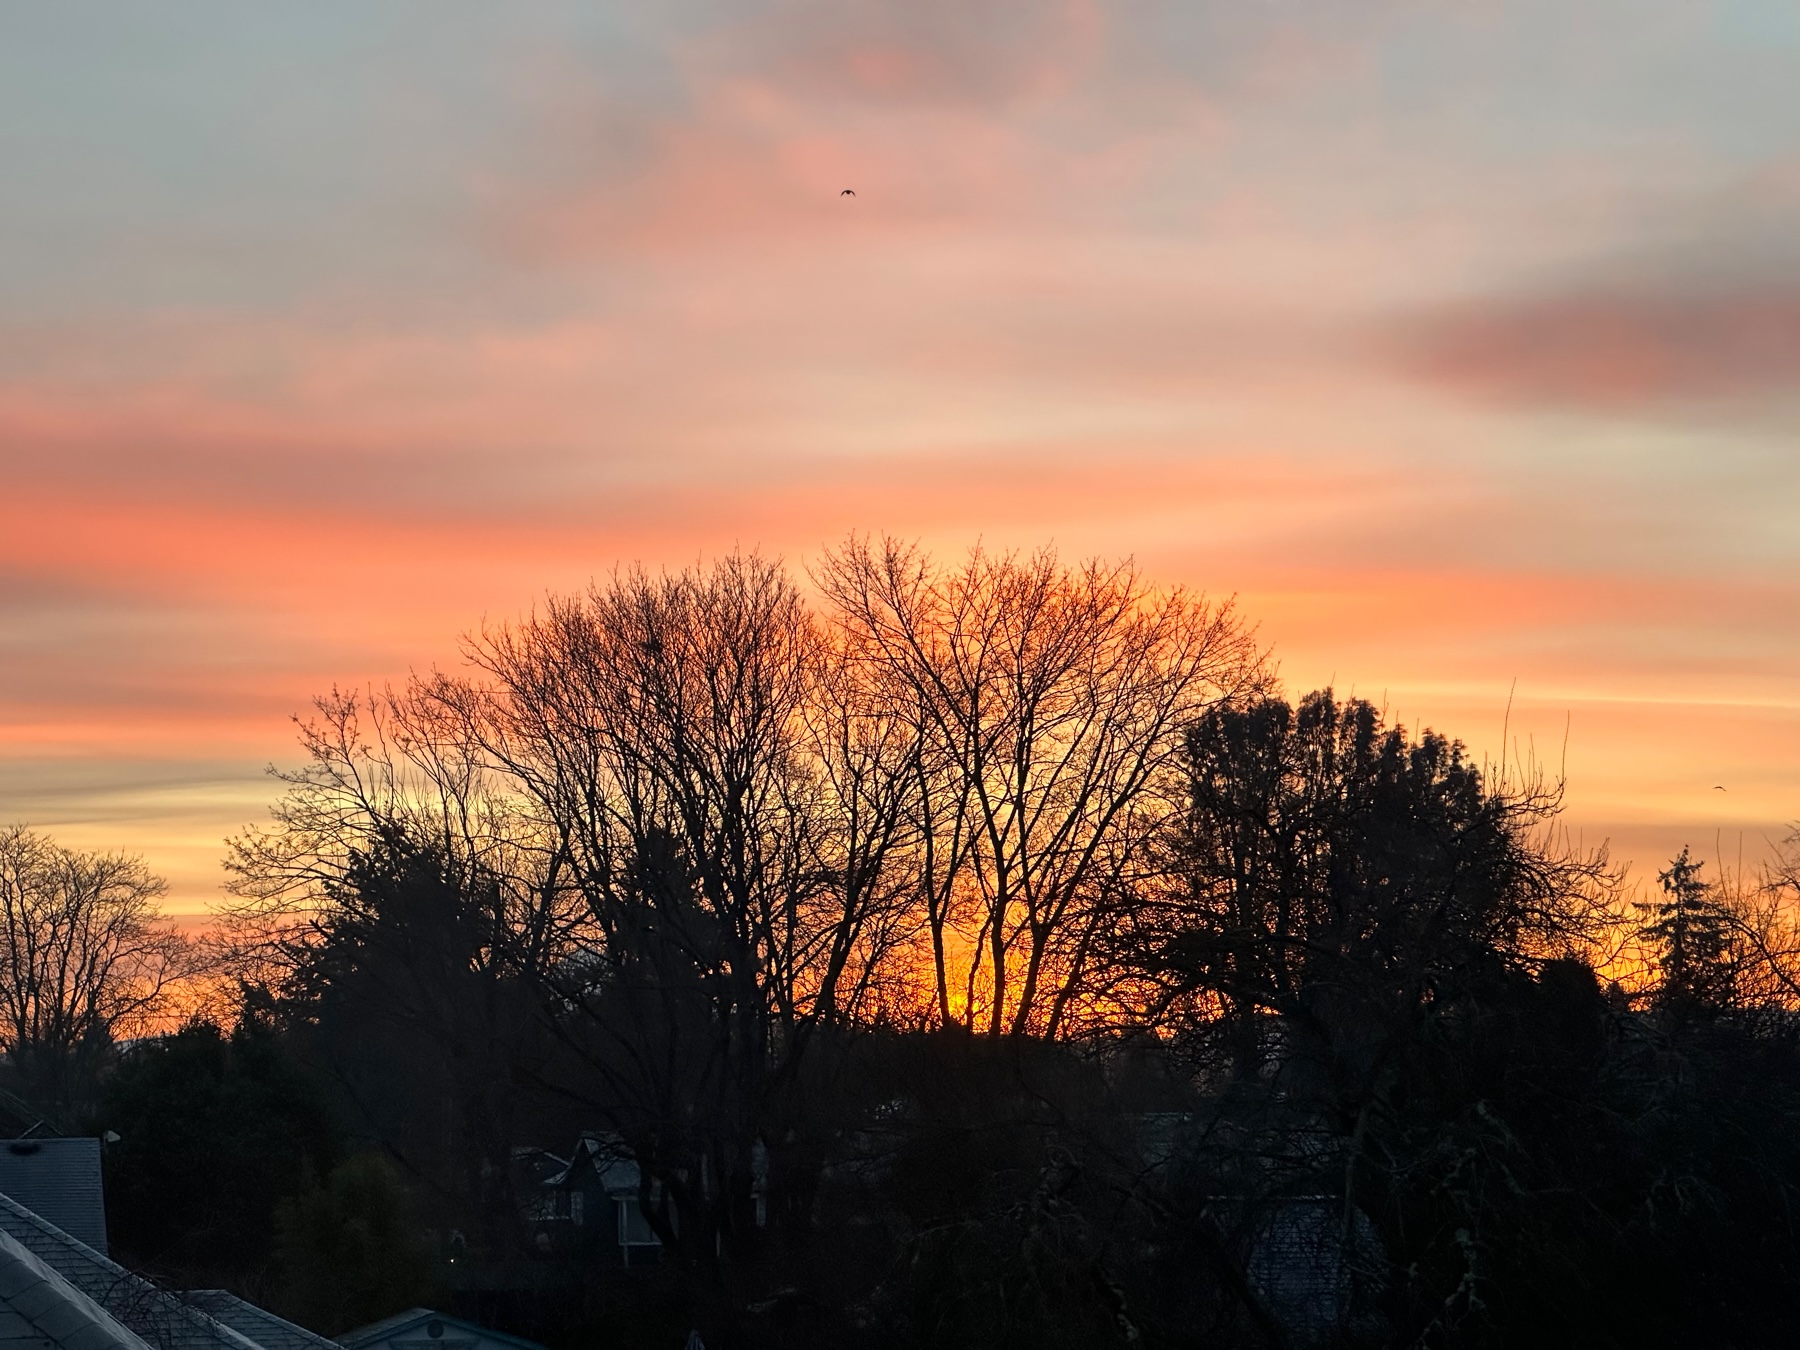 Sky with clouds having orange, red, and yellow hues with a hint of blue. Lower half of images has silhouettes of trees without leaves.